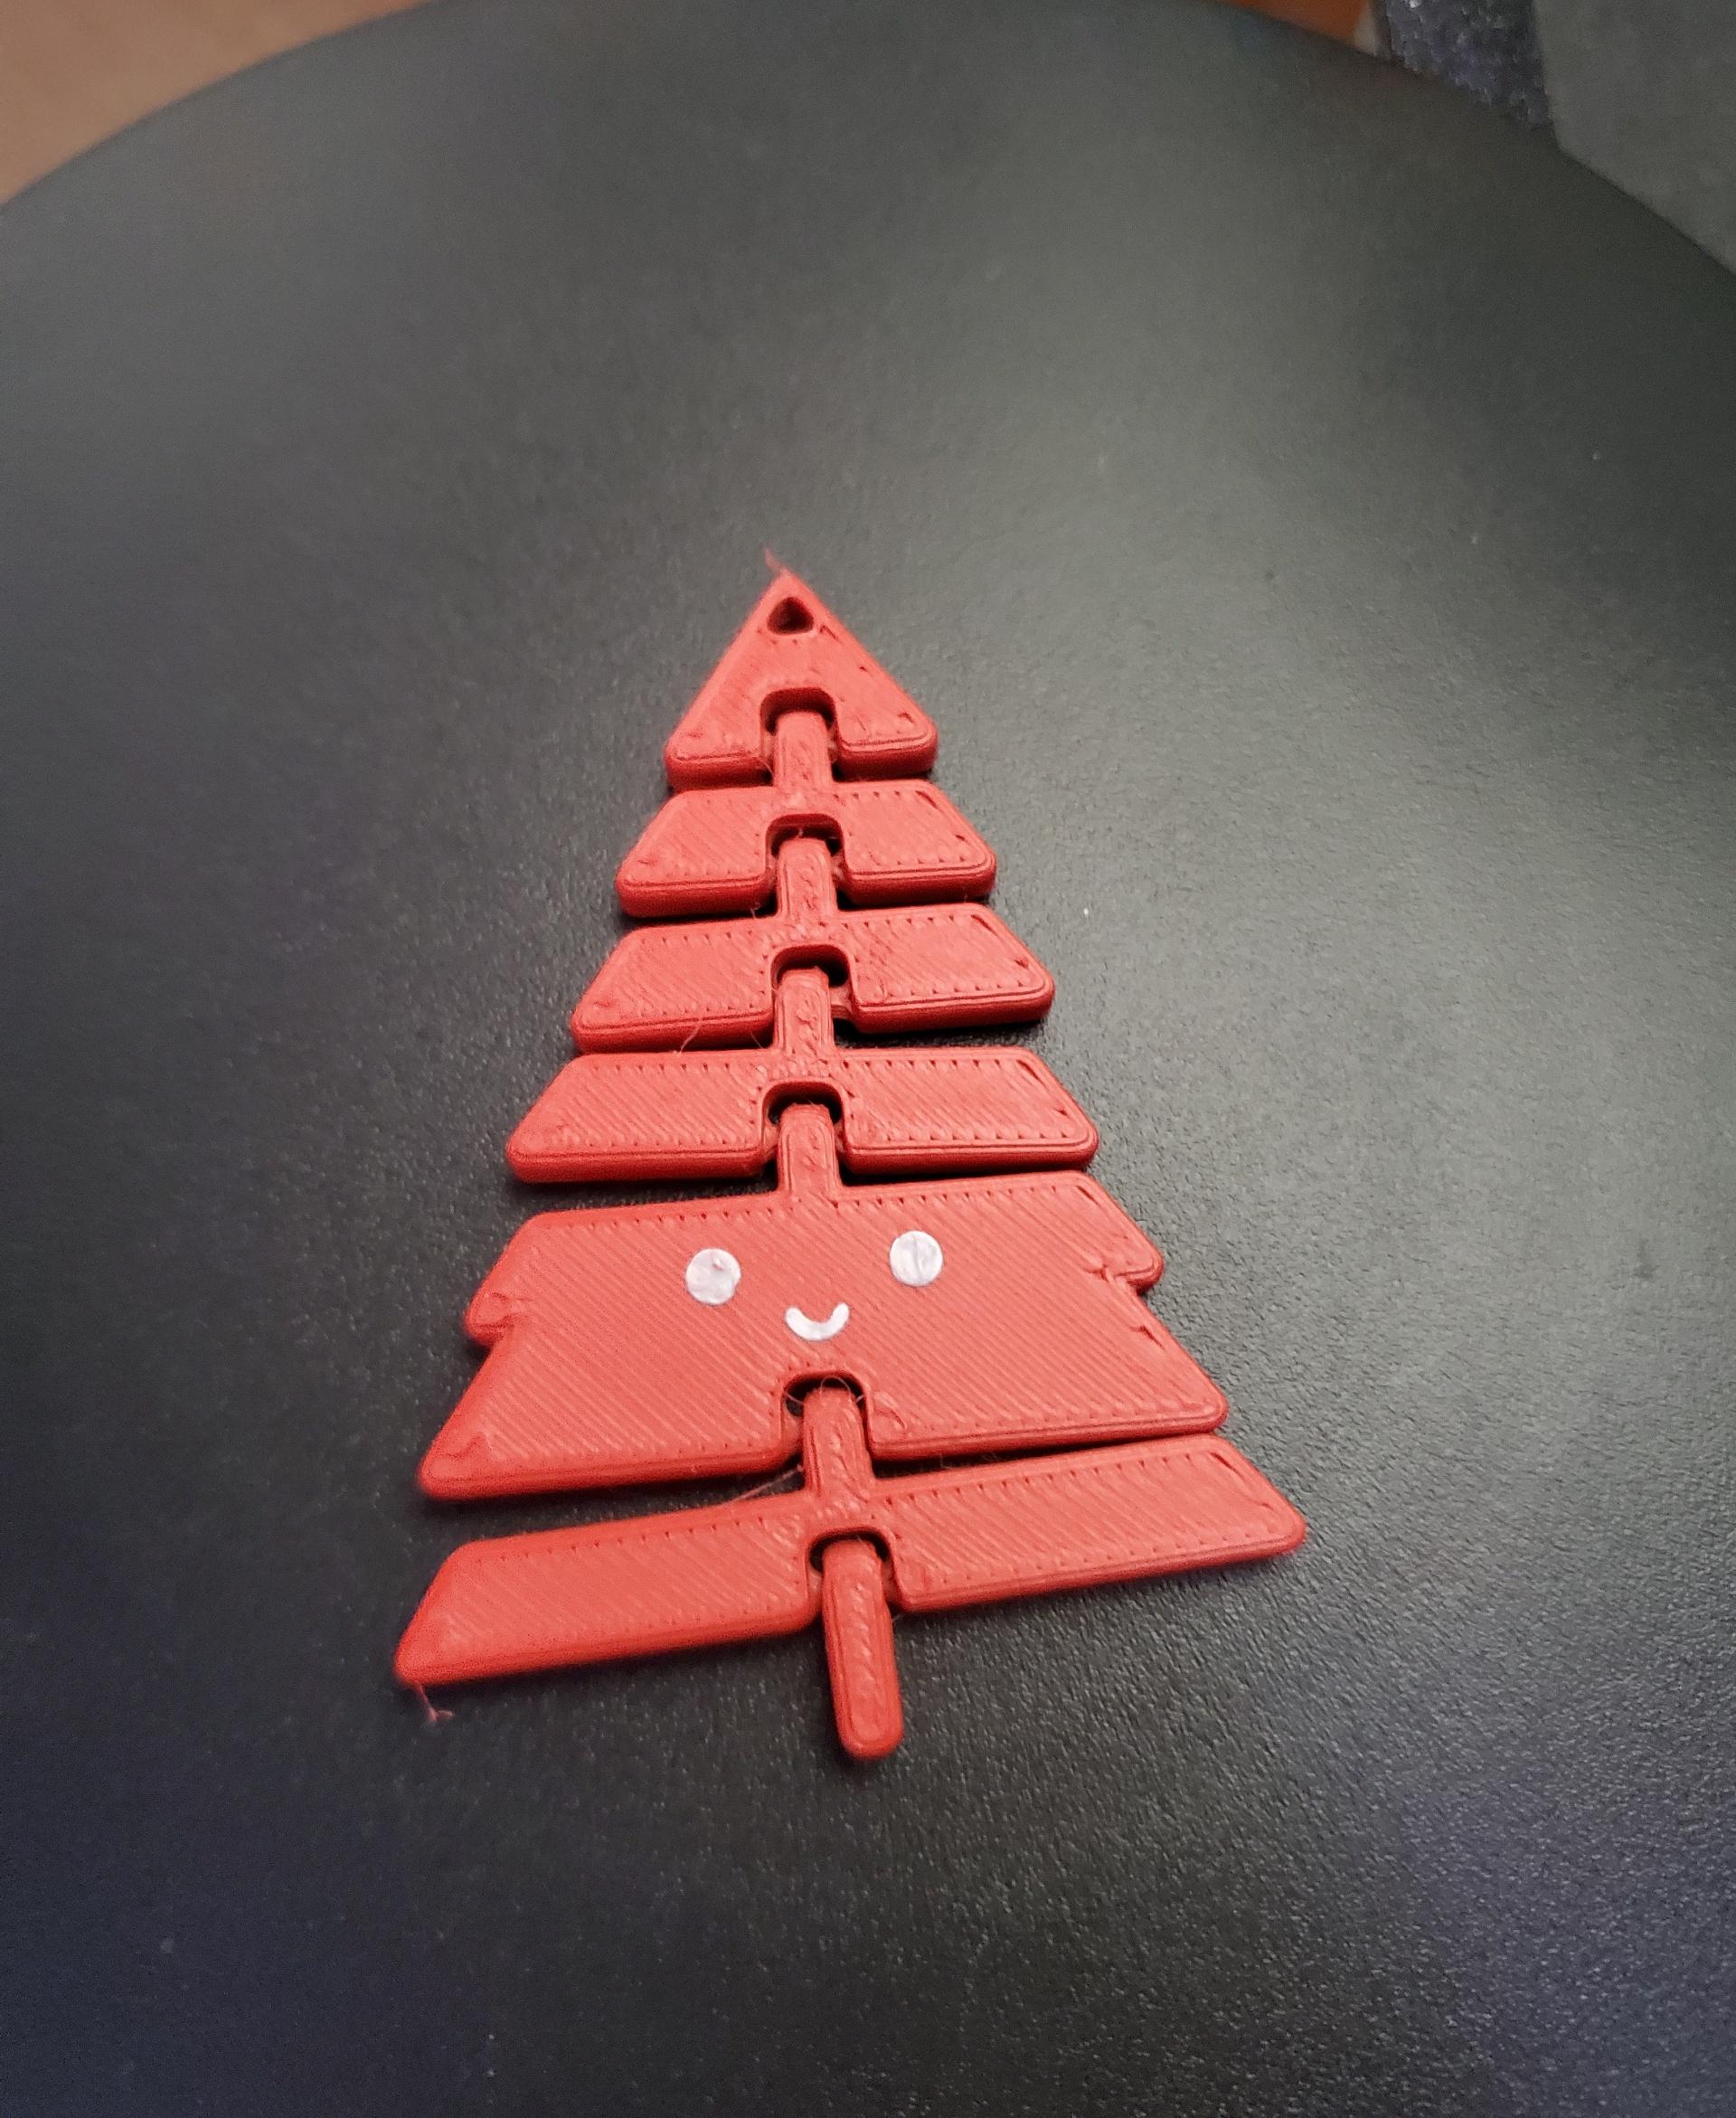 Articulated Kawaii Christmas Tree Keychain - Print in place fidget toy - 3mf - polyterra army red - 3d model